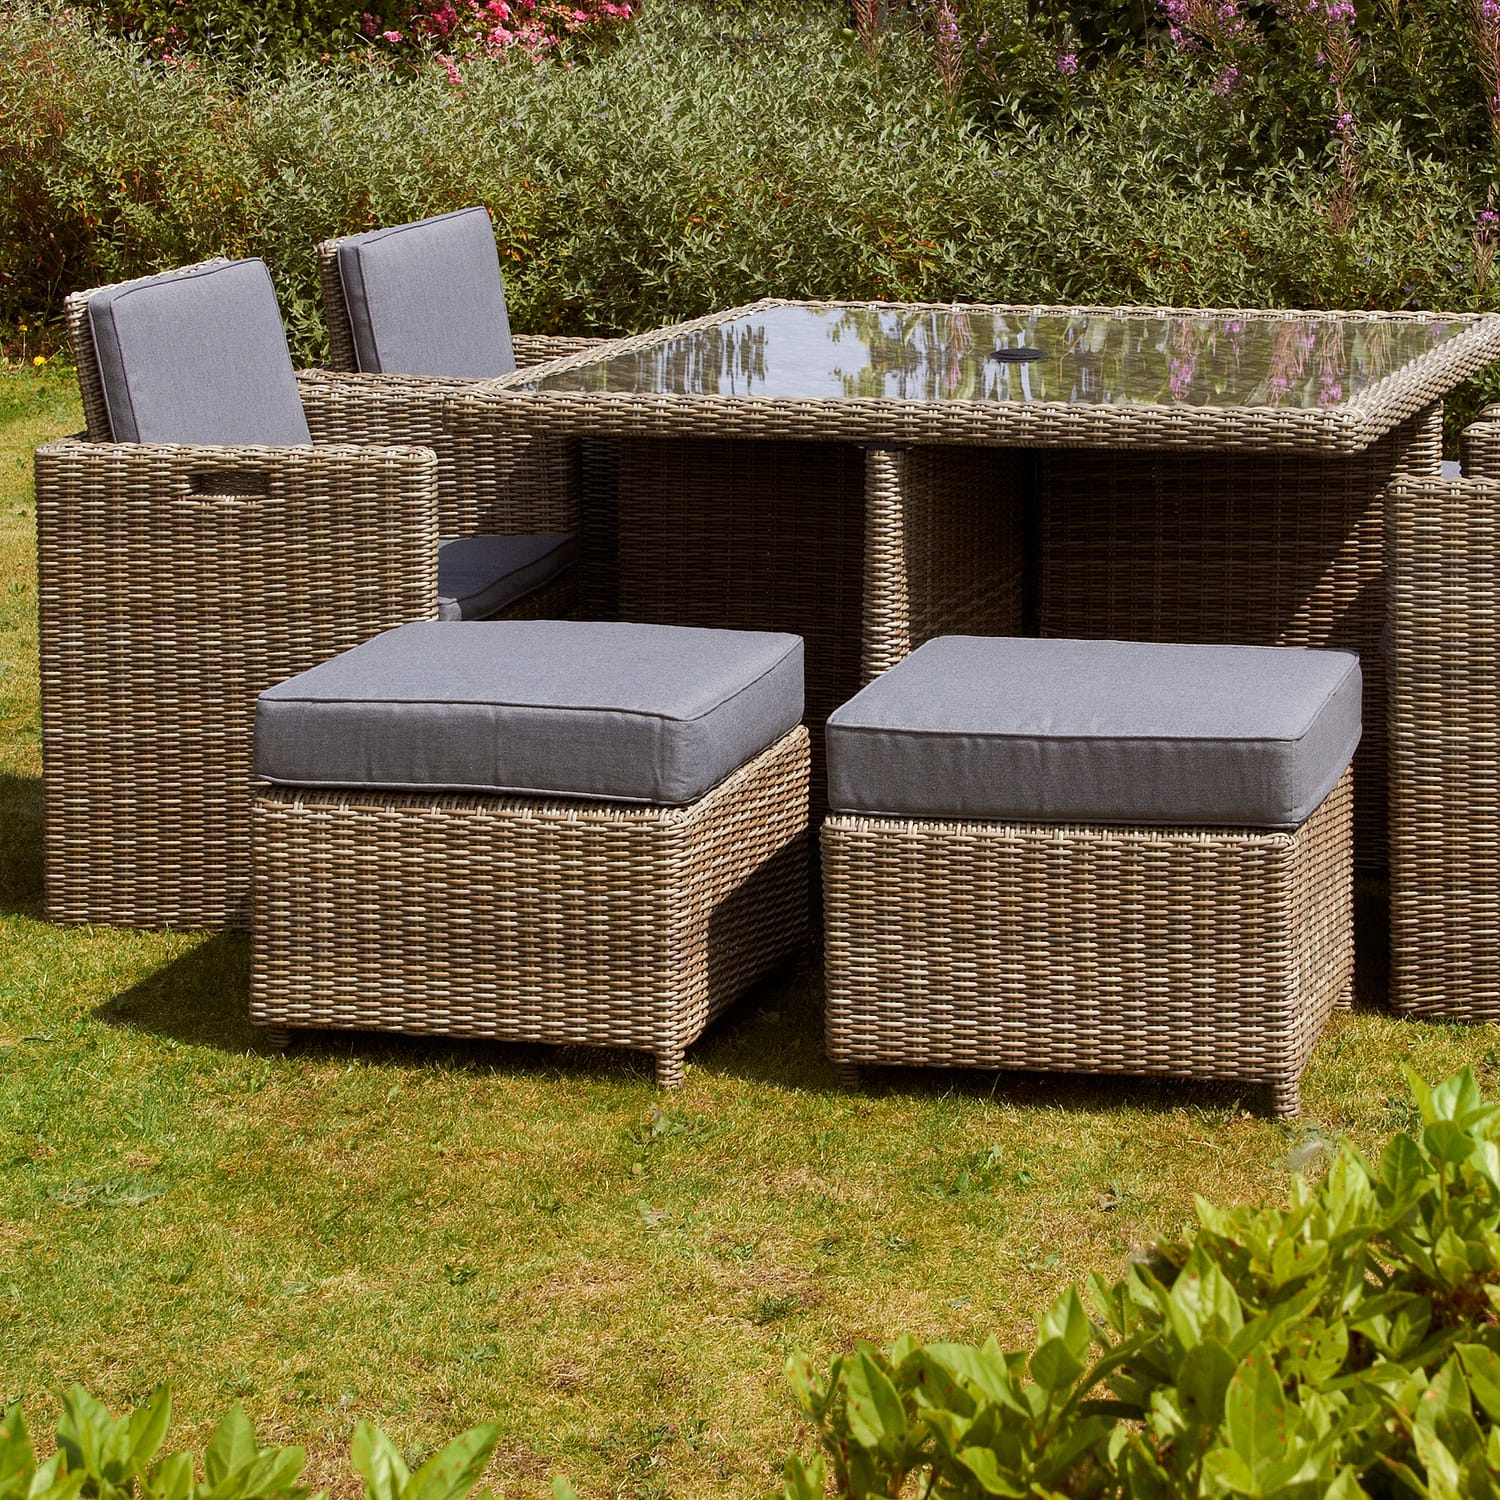 Wentwoth 8 Seater Cube Set Natural